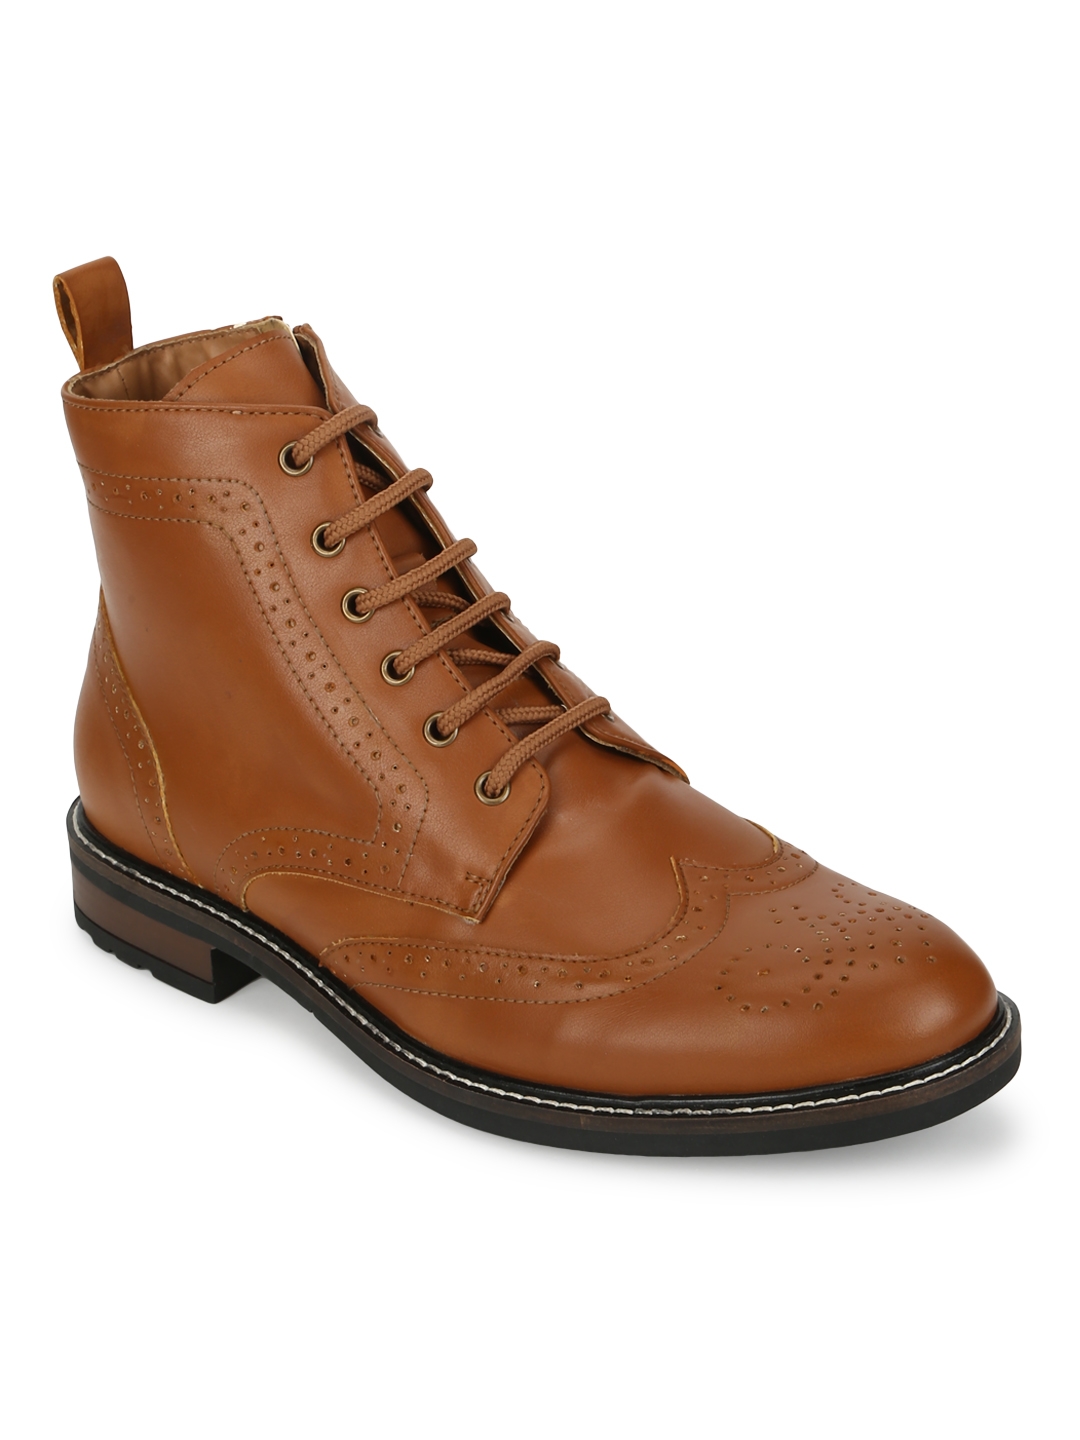 Truffle Collection | Tan PU Lace Up Men's Ankle Boots